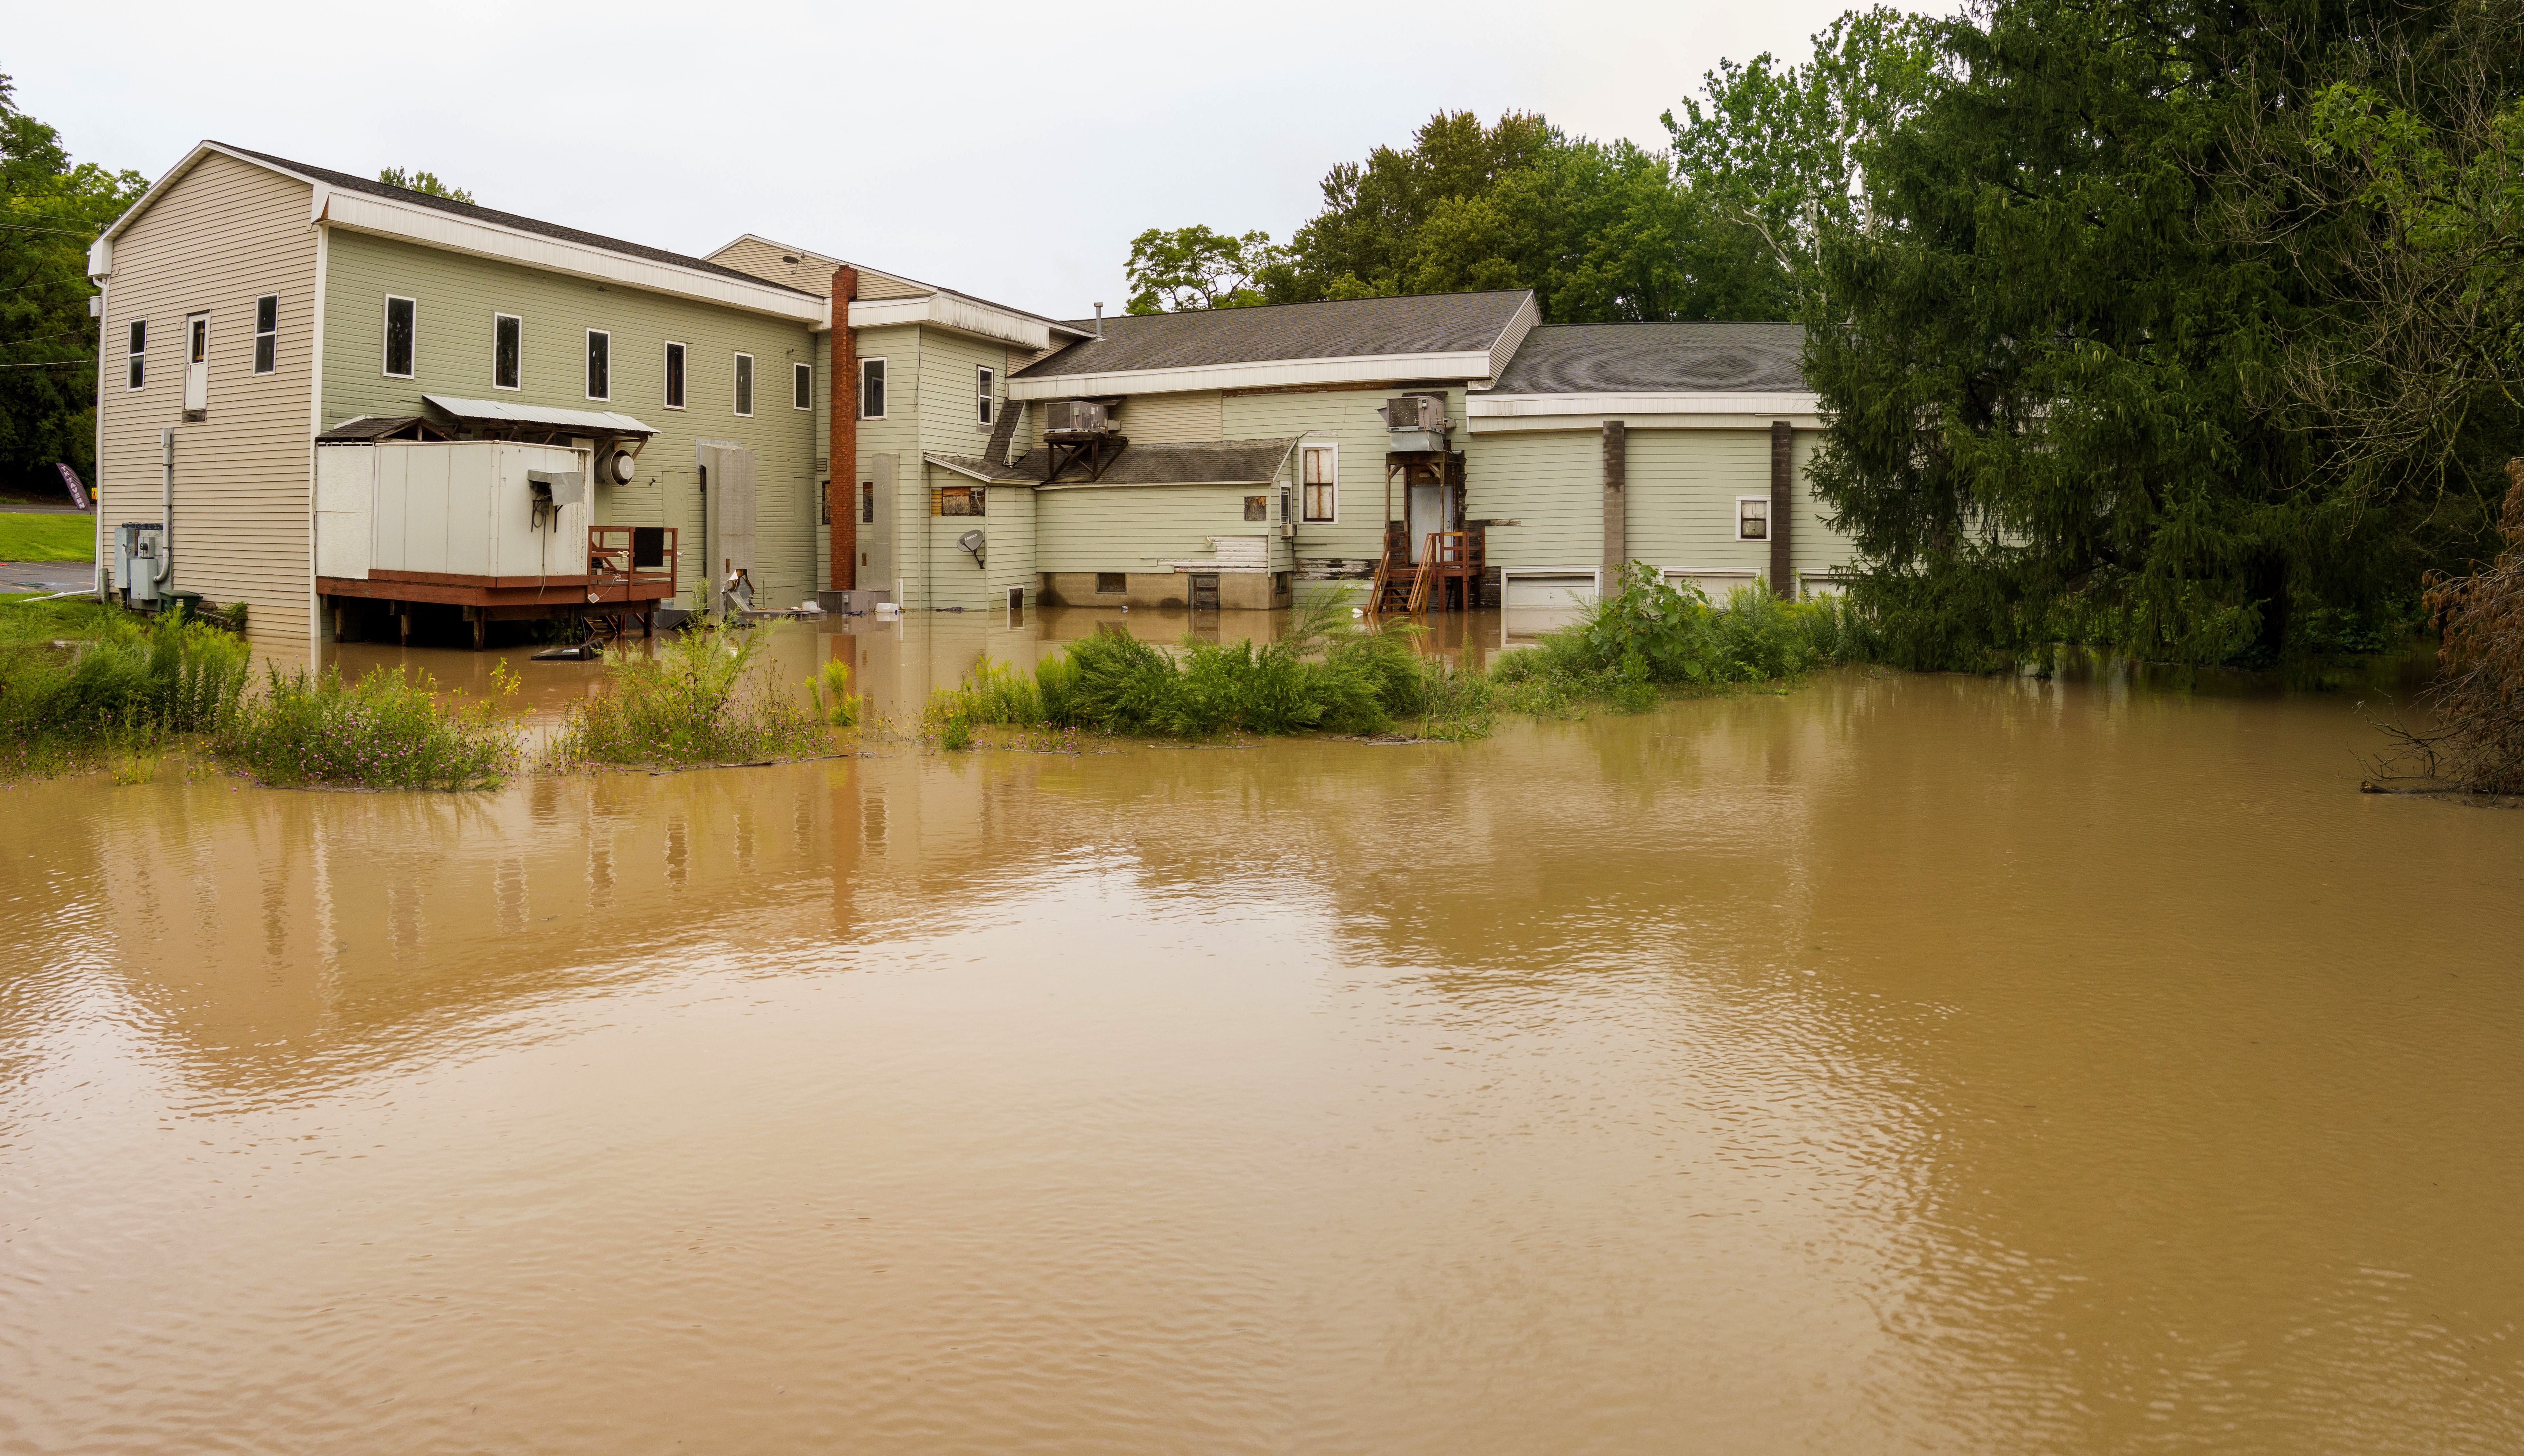 A view of TK Tavern in the Village of Camillus where Nine Mile Creek flooded the downtown area August 19, 2021, after heavy rainfall.